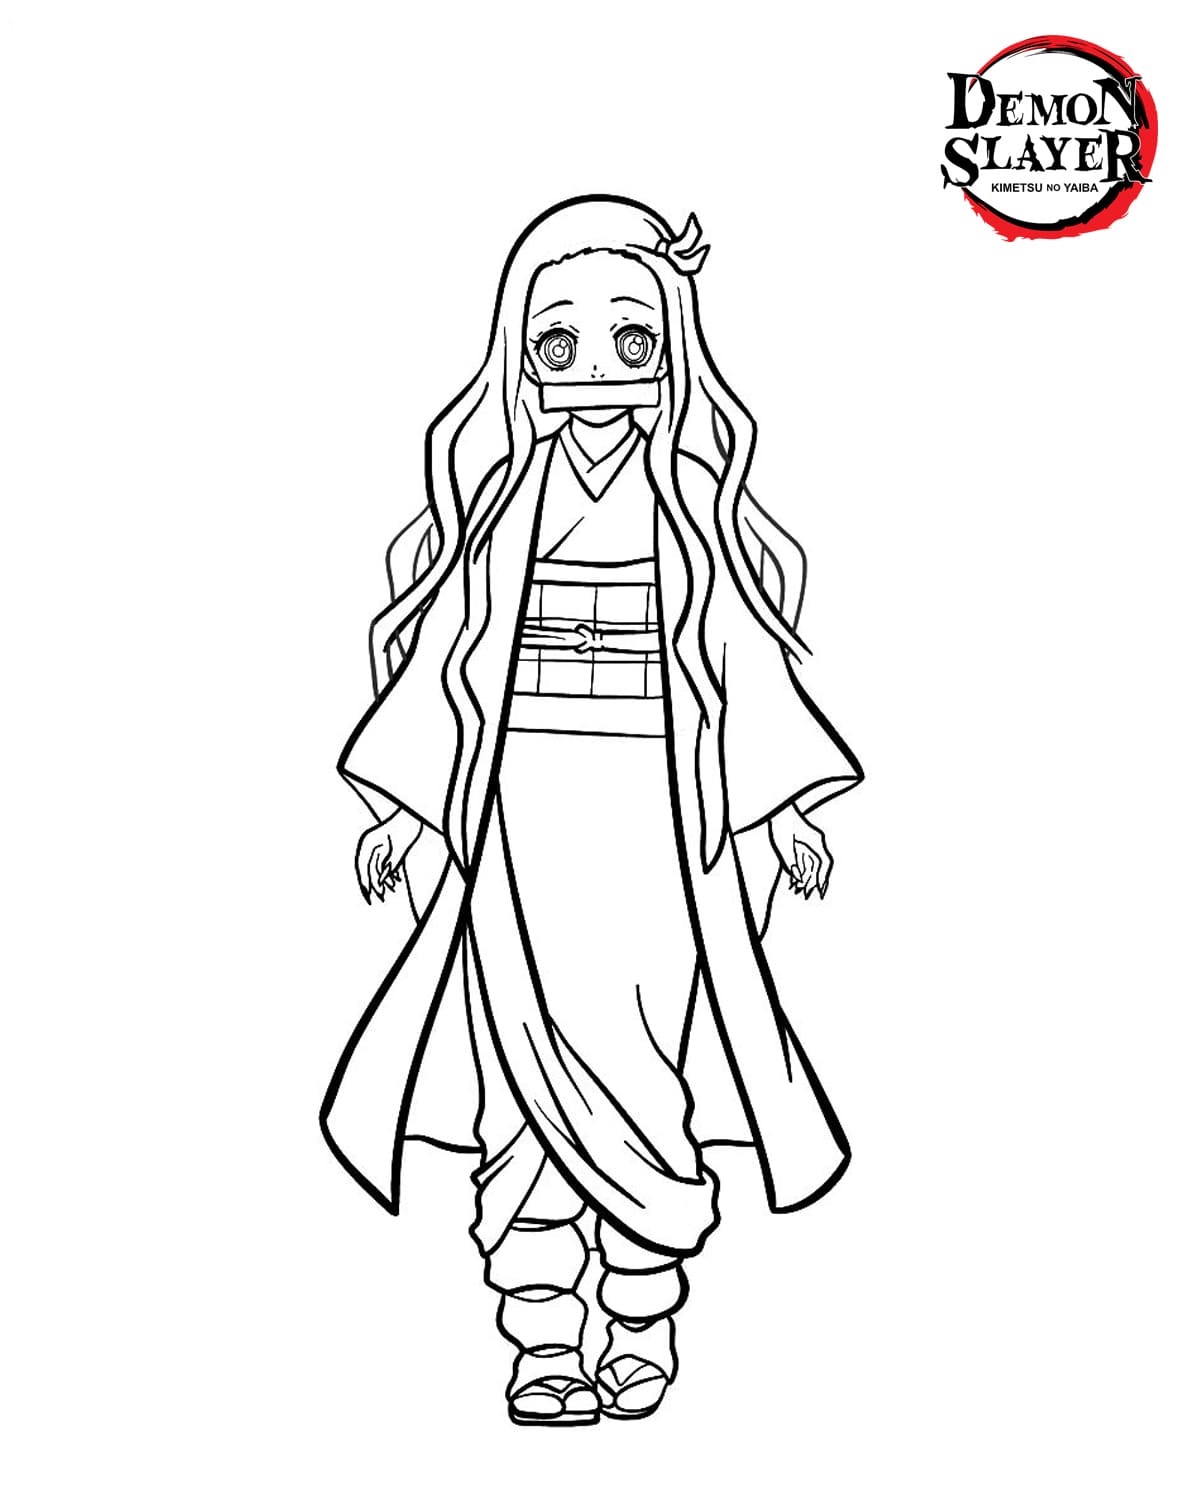 Free Demon Slayer Coloring Pages